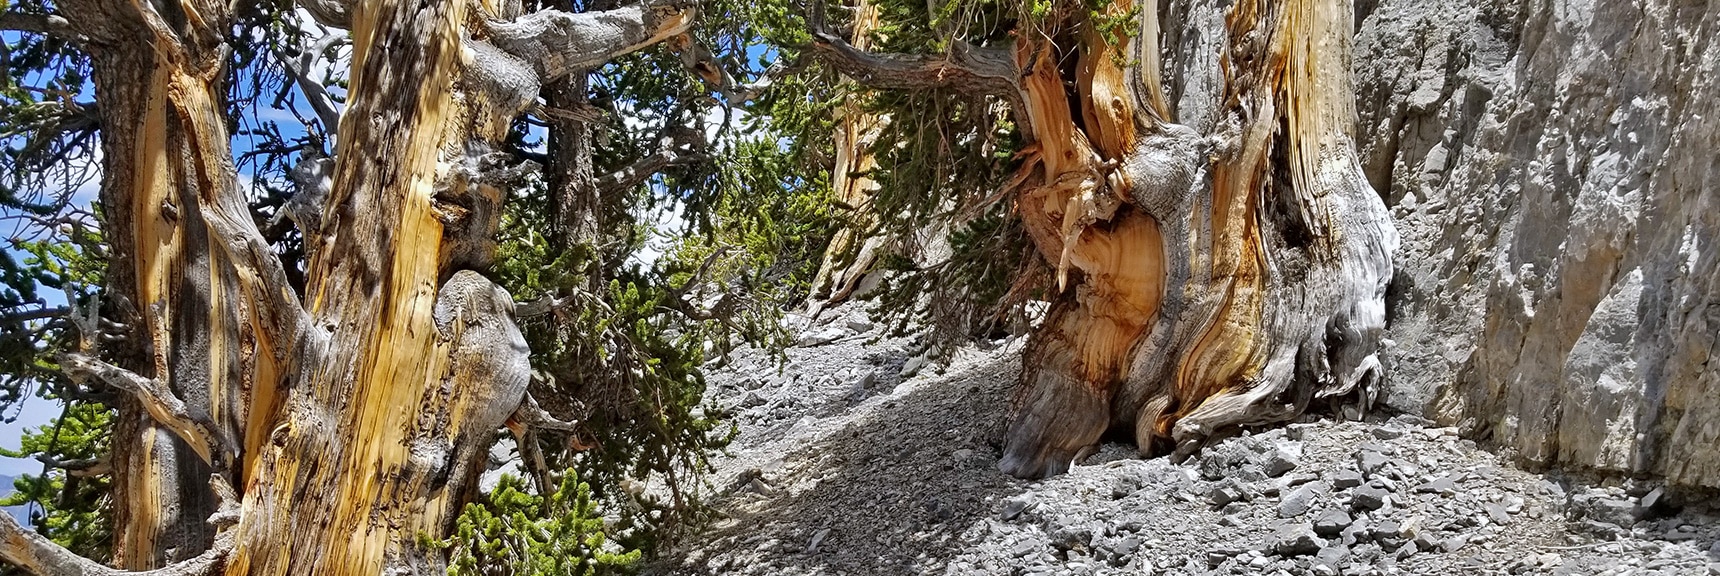 Ancient Bristlecone Pines Emerging from the Rock of the Mummy Mountain NW Cliffs | Mummy Mountain NW Cliffs | Mt Charleston Wilderness | Spring Mountains, Nevada